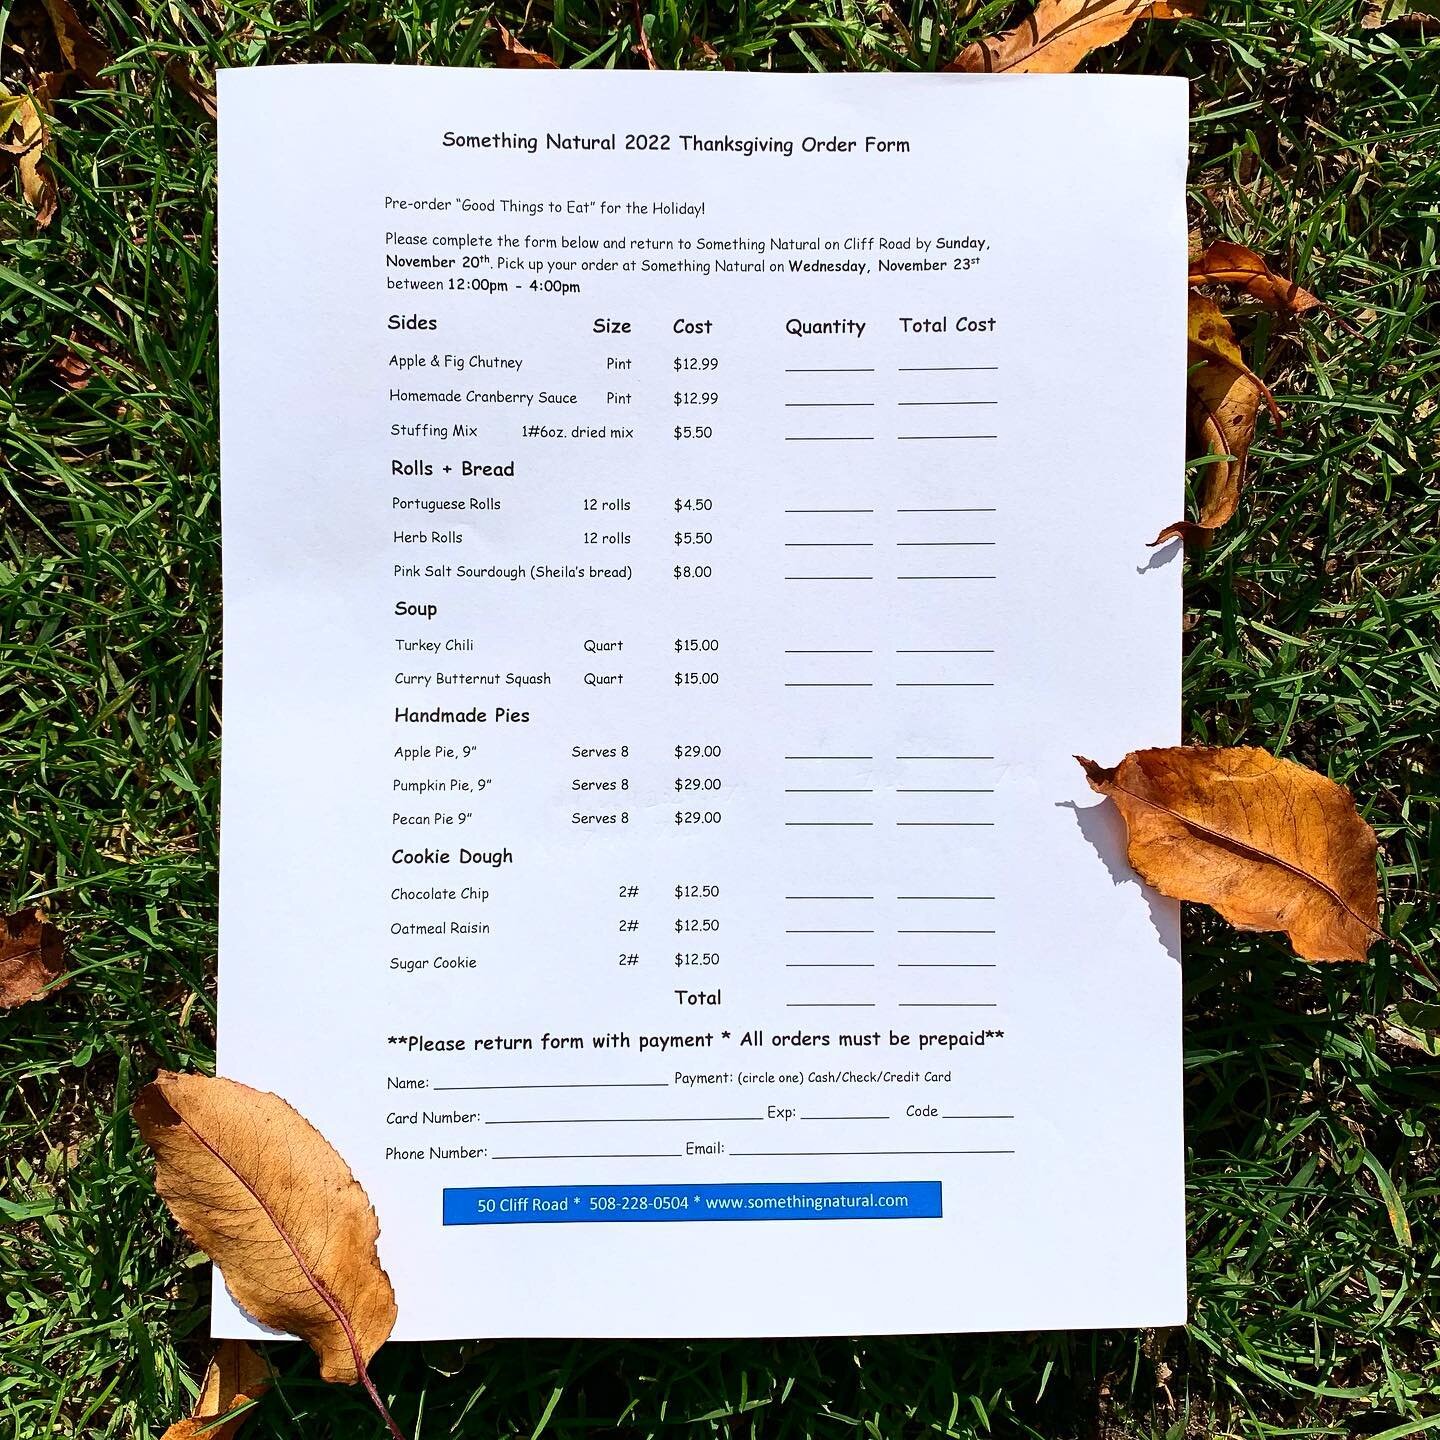 Thanksgiving order forms are now available! Come grab one from the shop or download off of our website, somethingnatural.com . 

We are still open 10-3 everyday! 

Hot soups of the day: potato leek, mushroom barley, kale chorizo, corn chowder